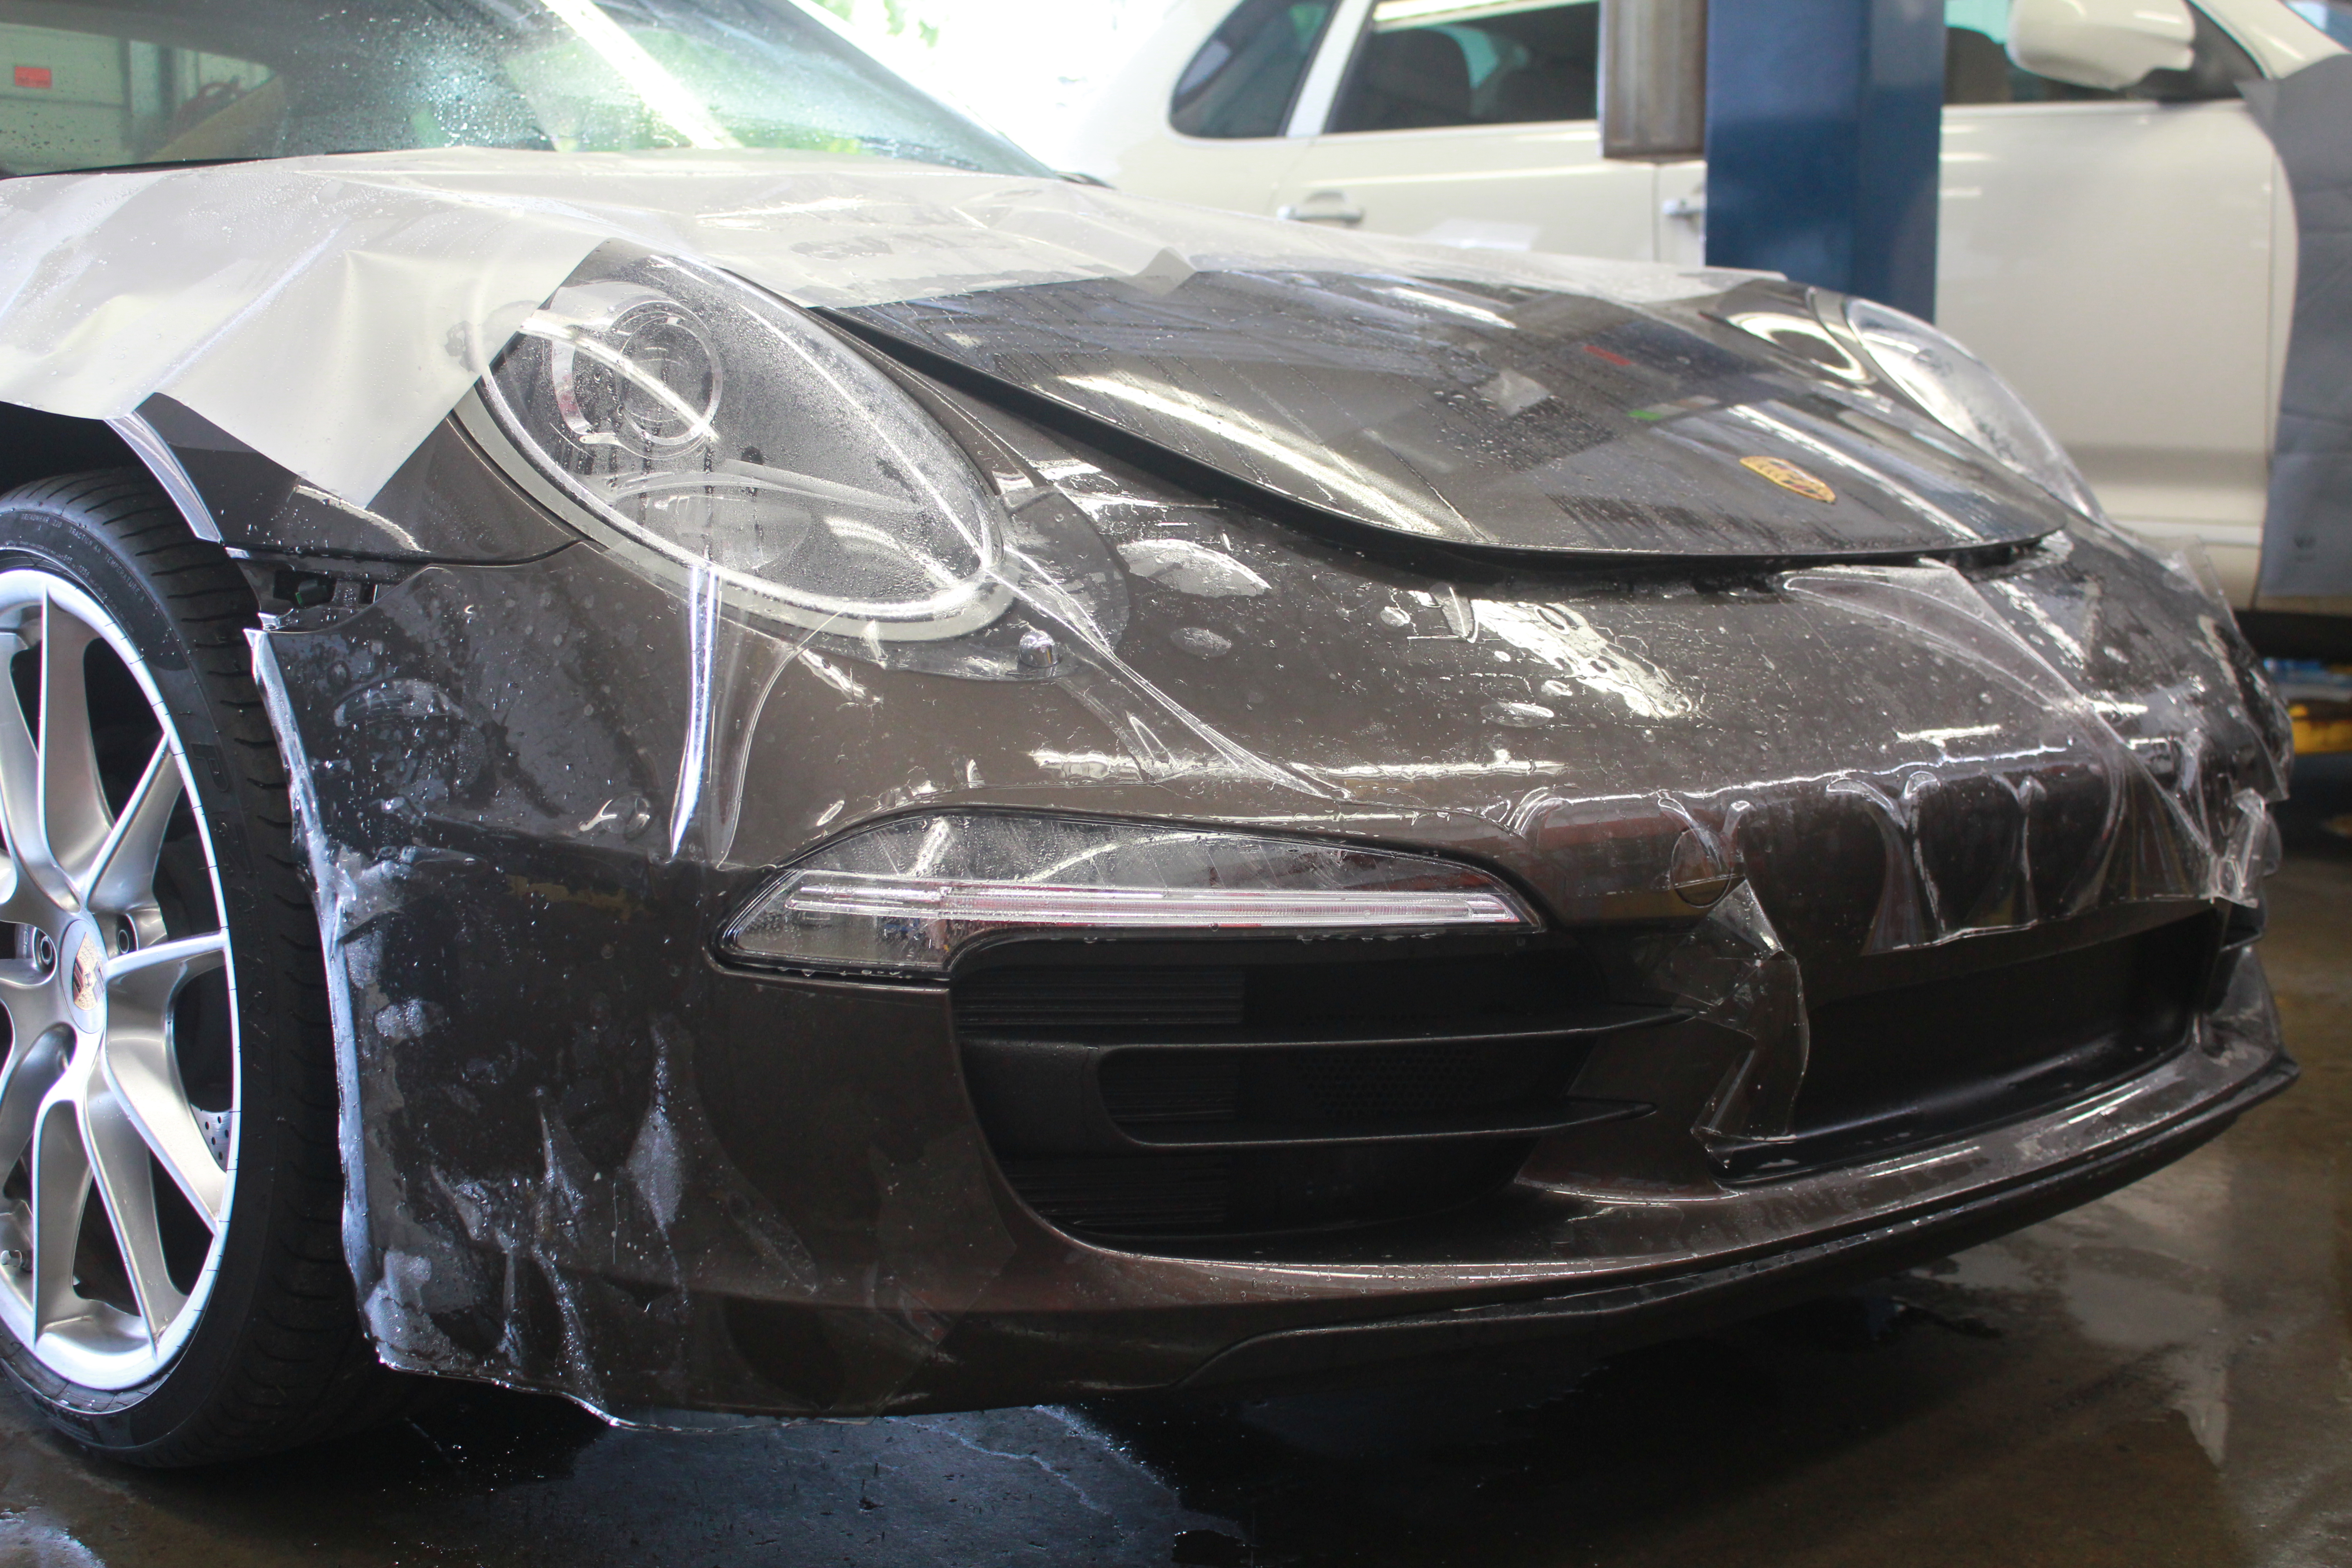 What You Should Know About Paint Protection Film (Clear Bra)